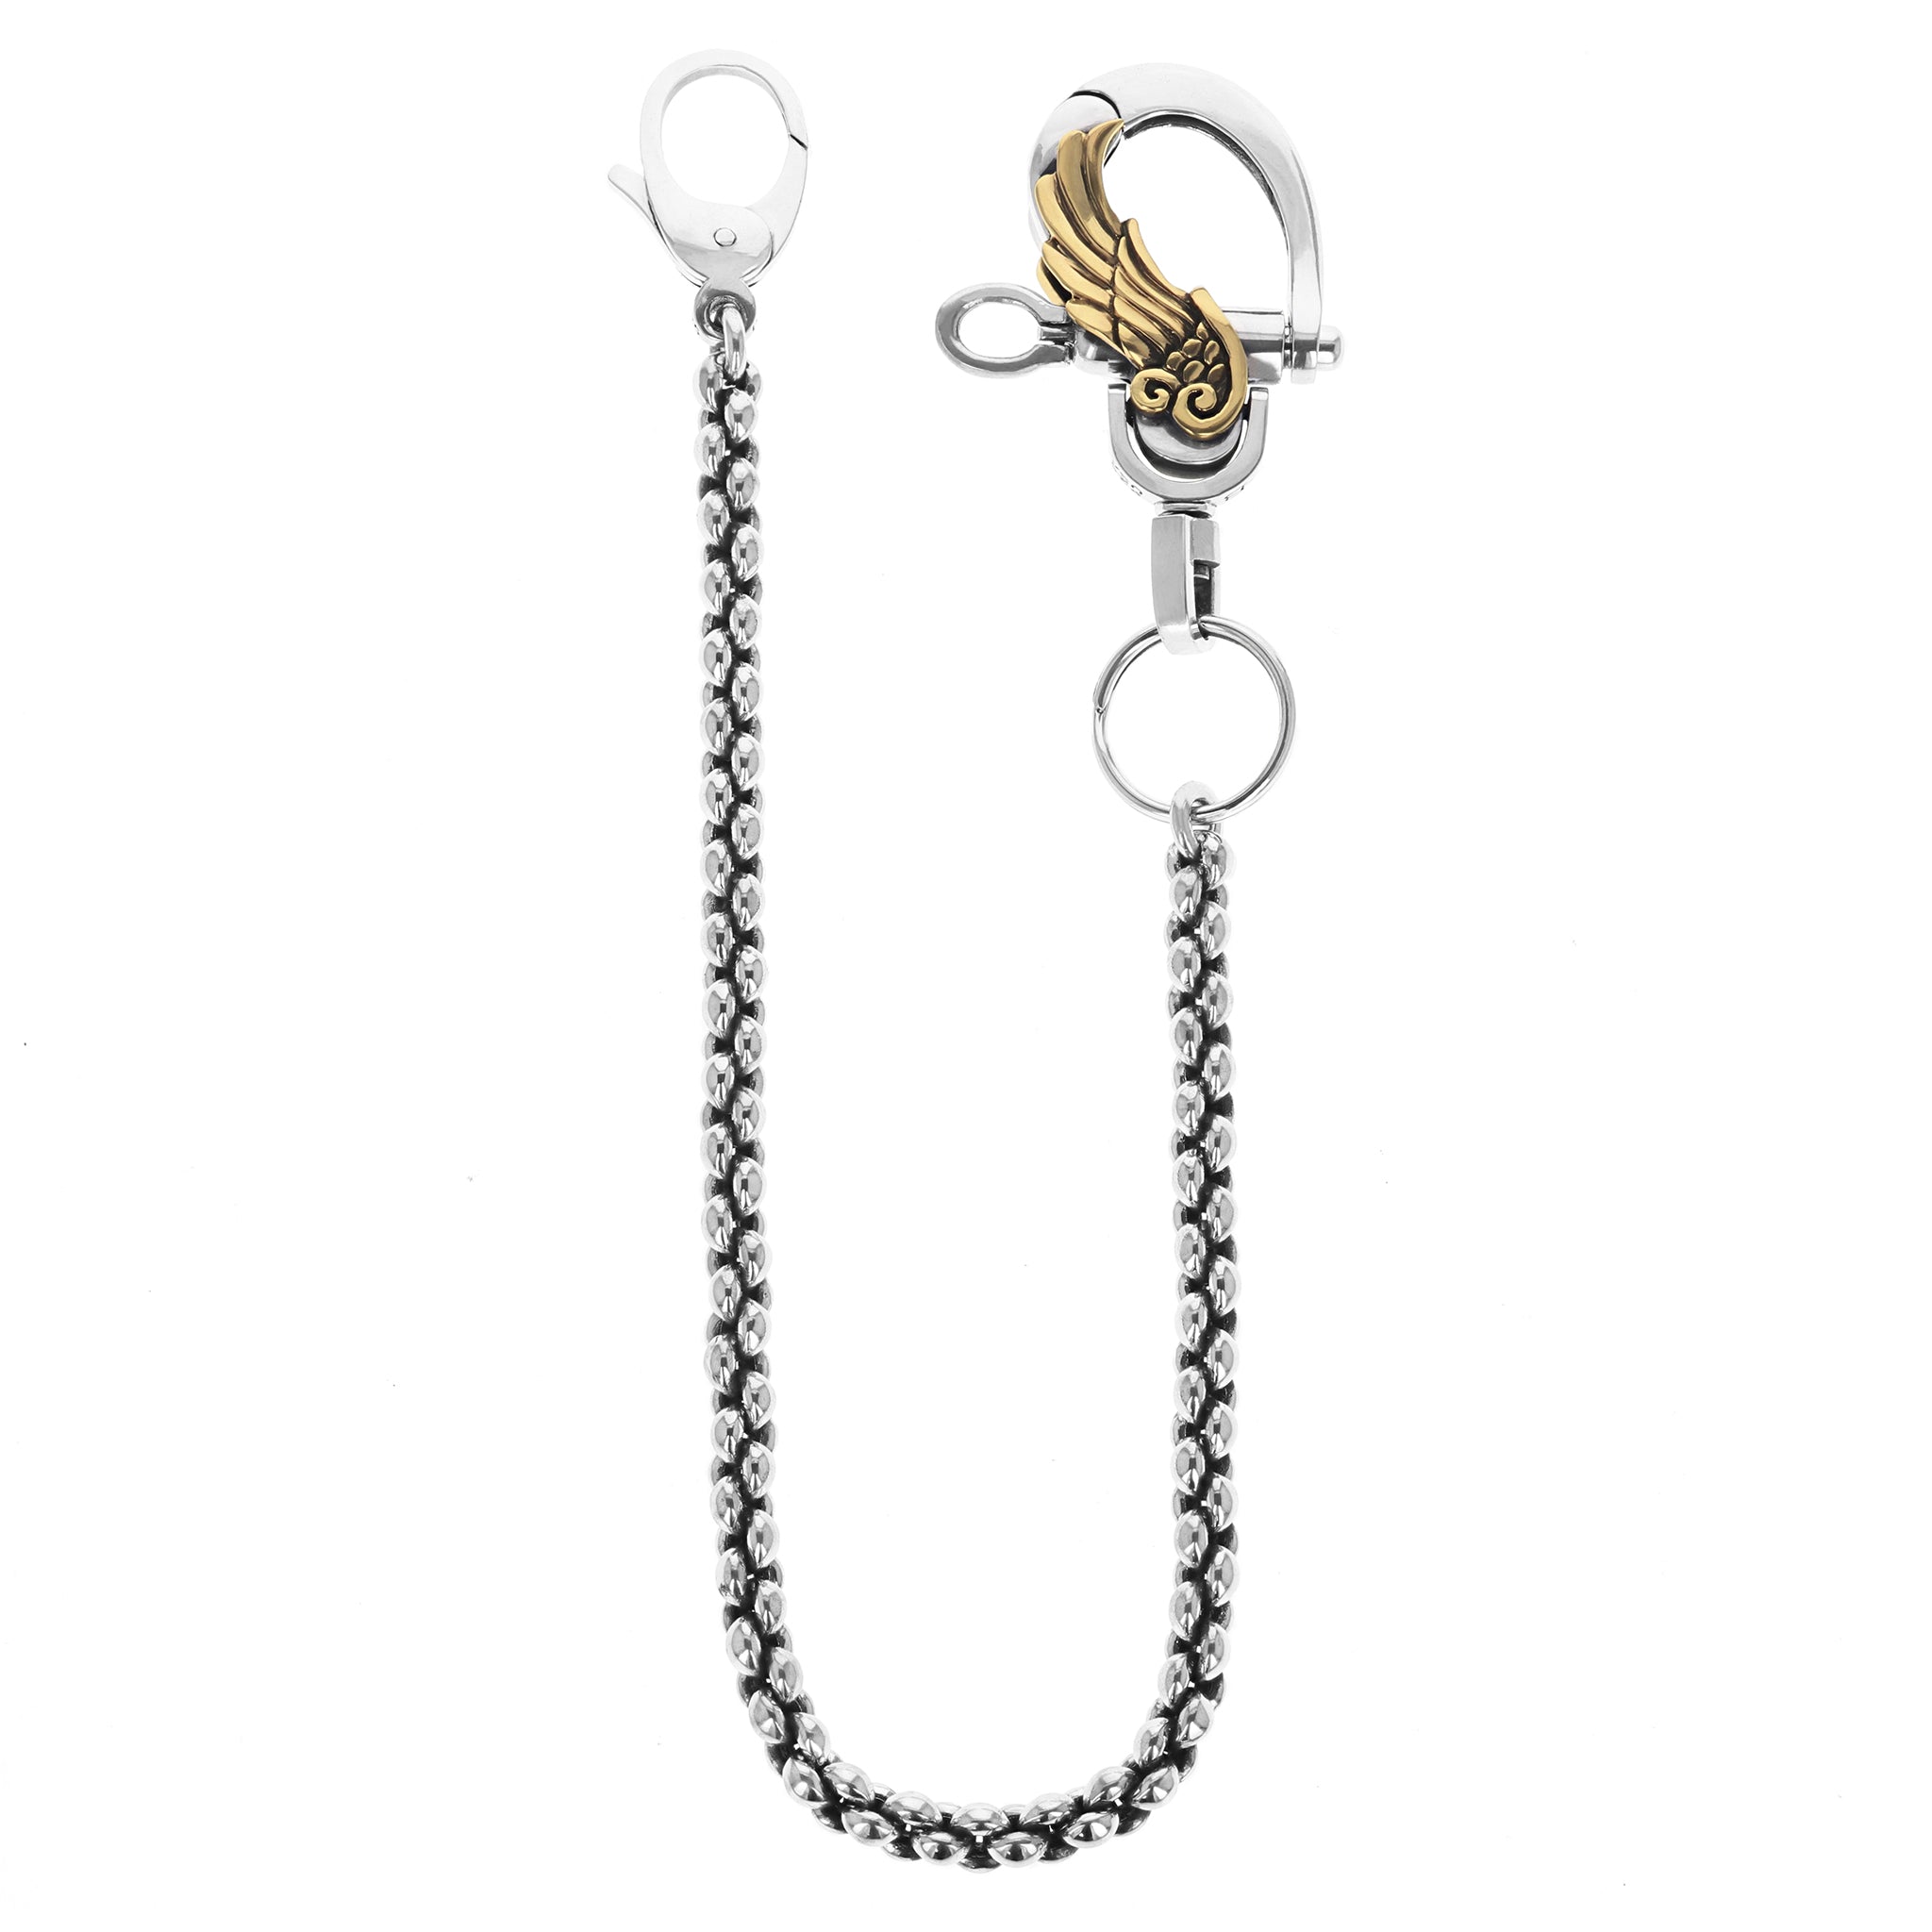 Infinity Link Wallet Chain w/ With Gold Alloy Wing Motif